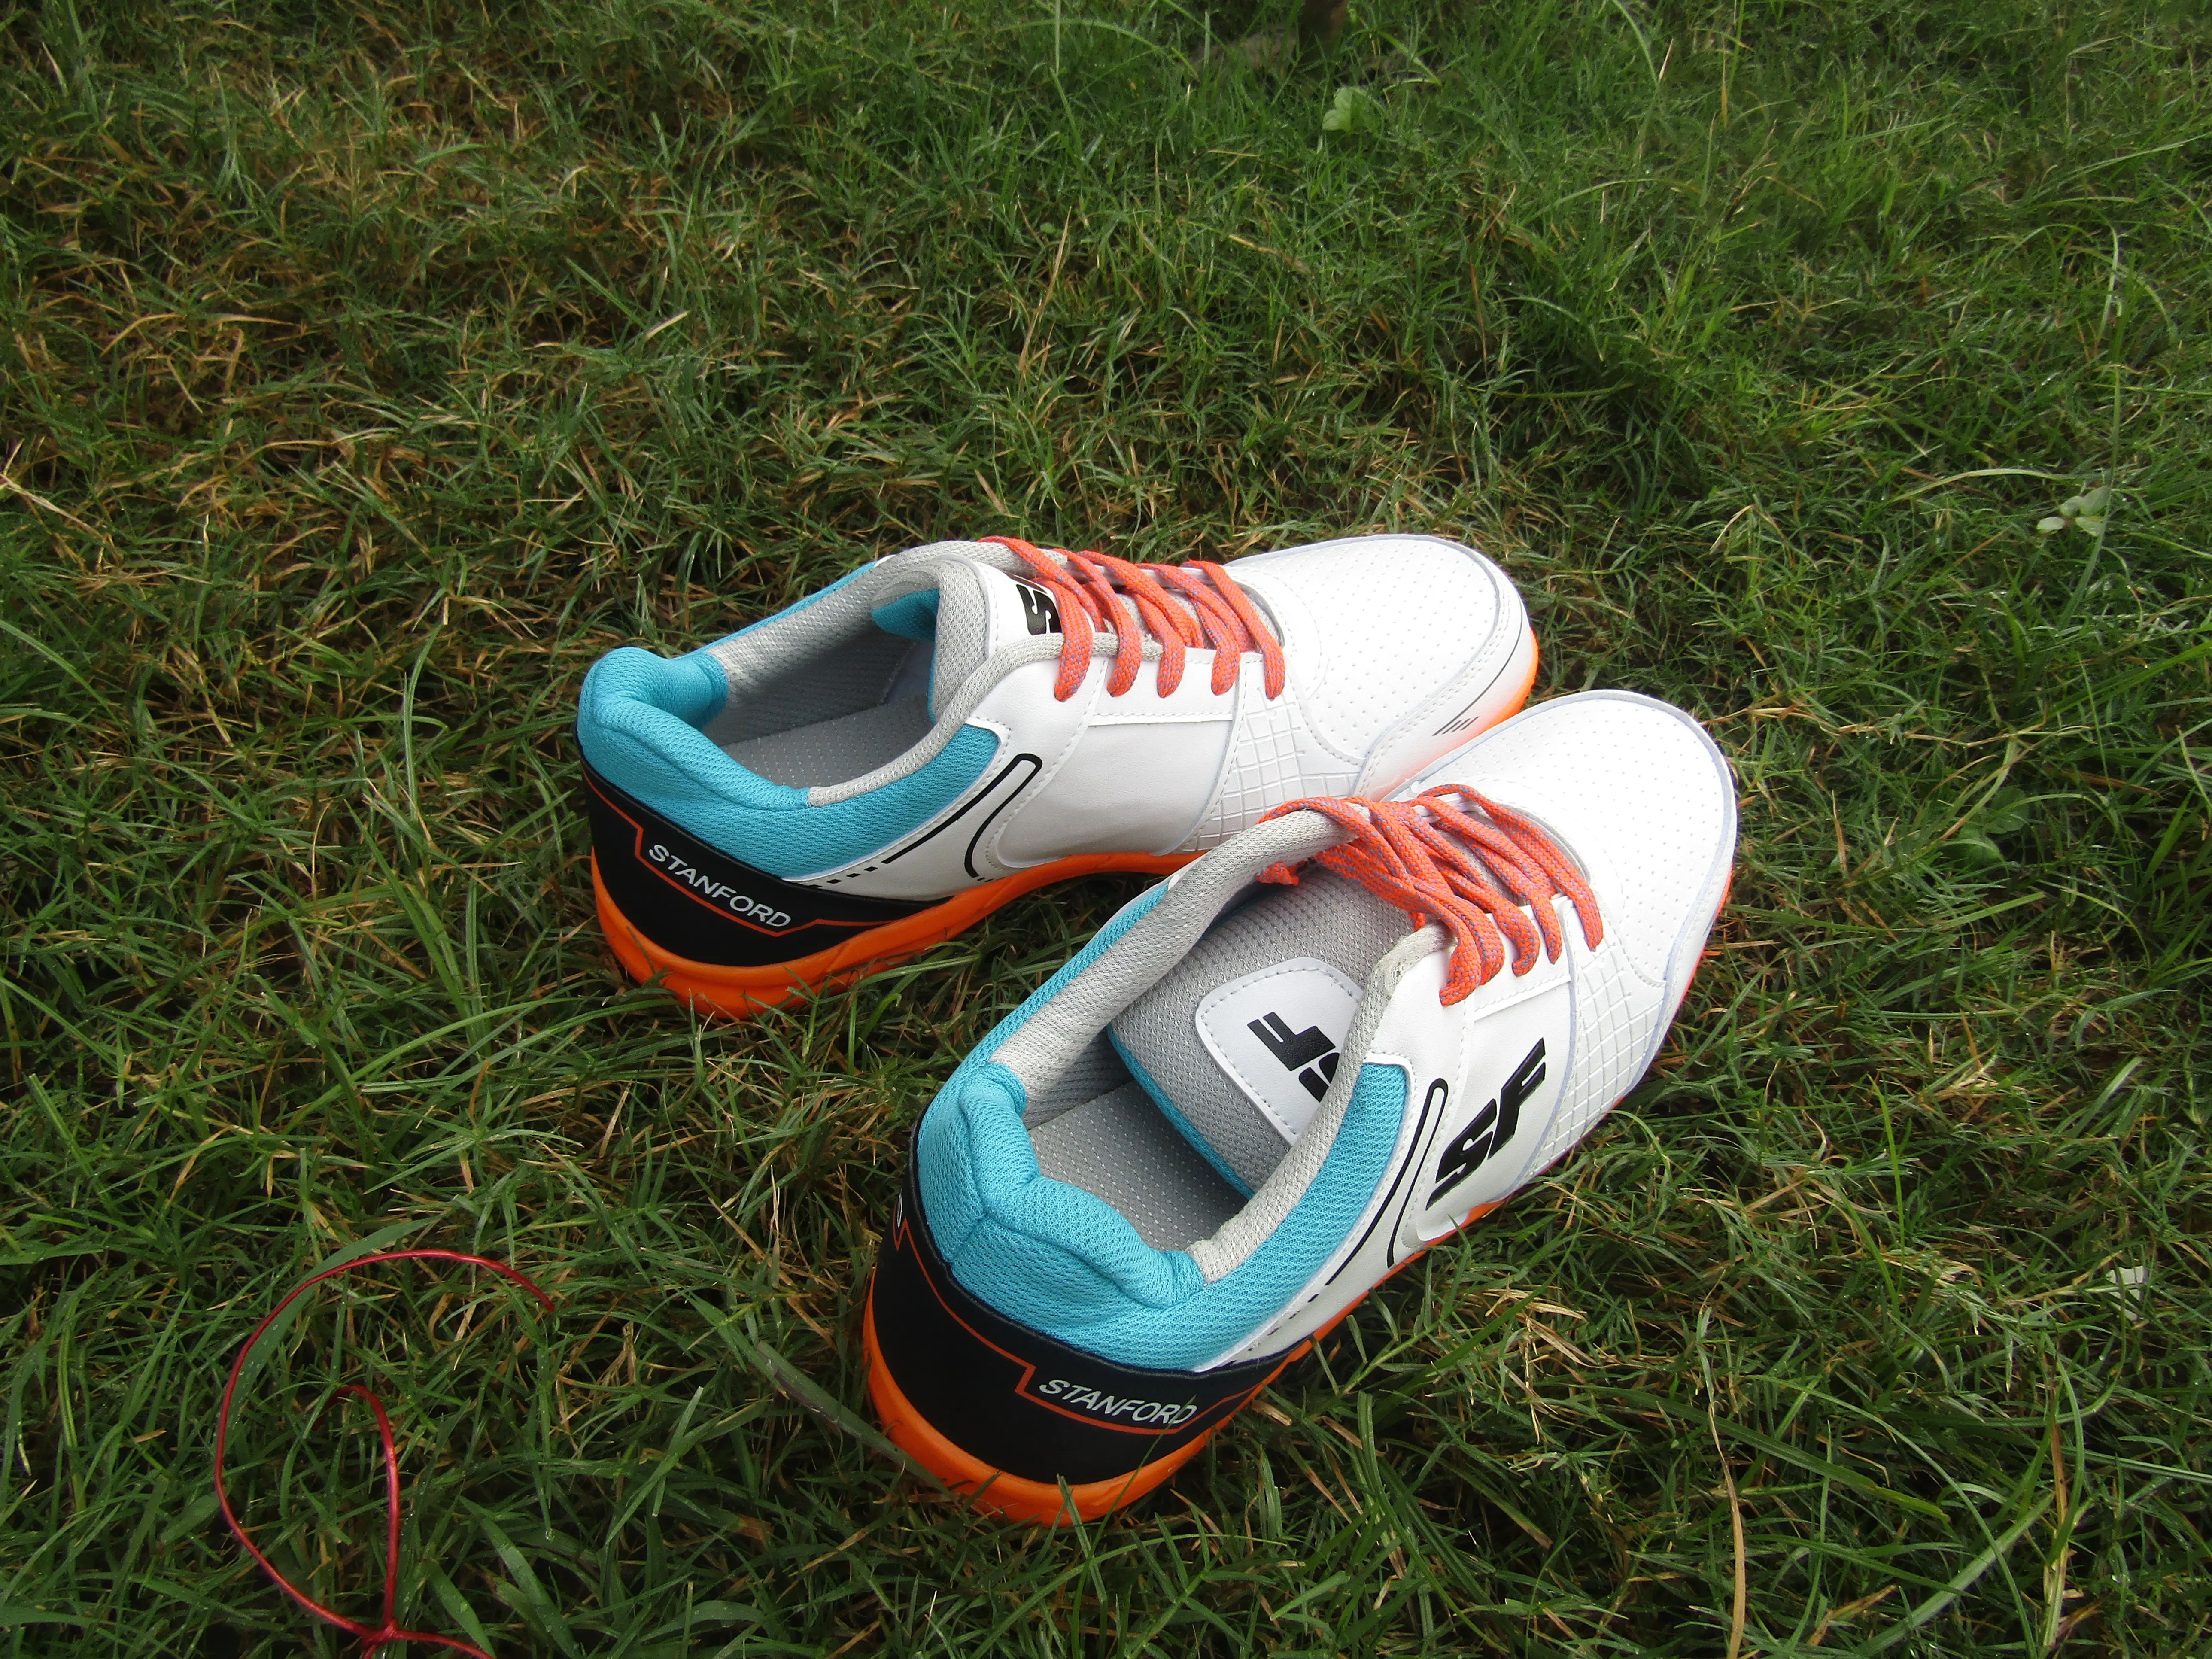 SF warrior Cricket Shoes teal and white